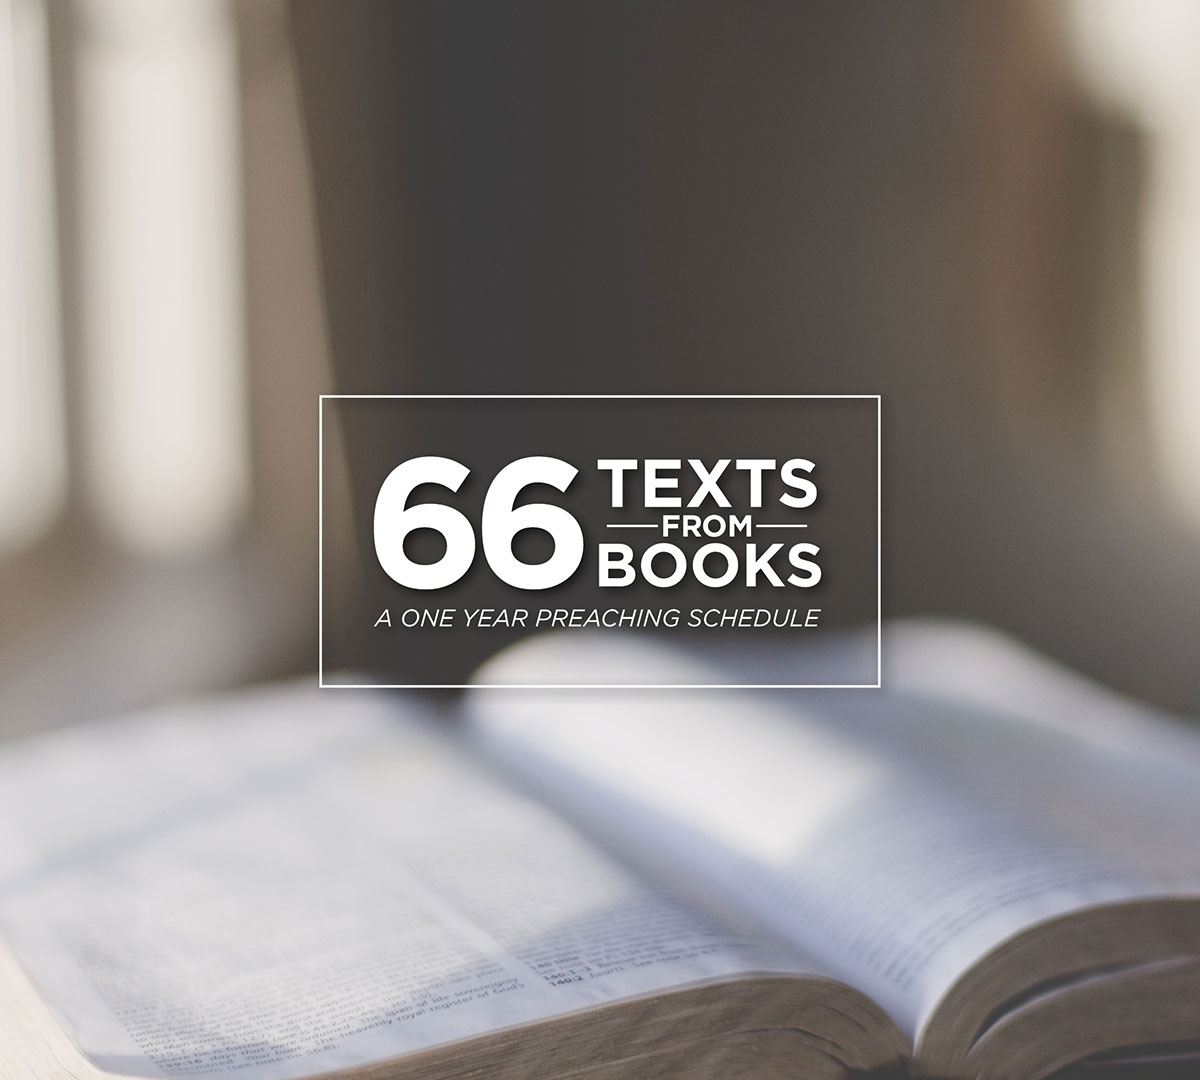 66 Texts from 66 Books